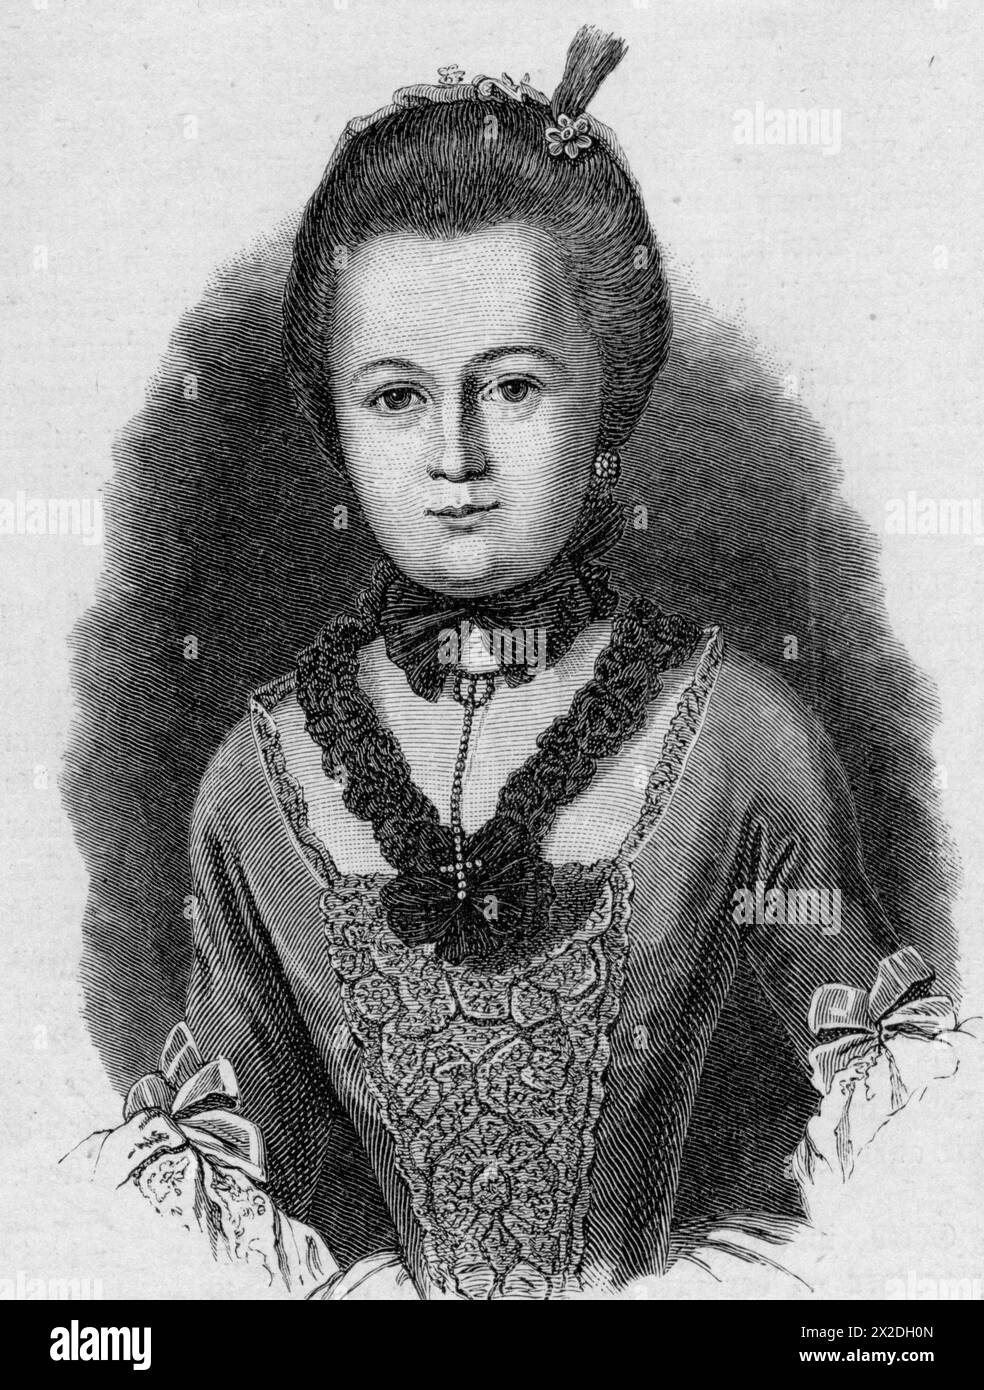 Schoenkopf, Anna Katharina, 22.8.1746 - 20.5.1810, Saxon landlord's daughter, wood engraving, ADDITIONAL-RIGHTS-CLEARANCE-INFO-NOT-AVAILABLE Stock Photo